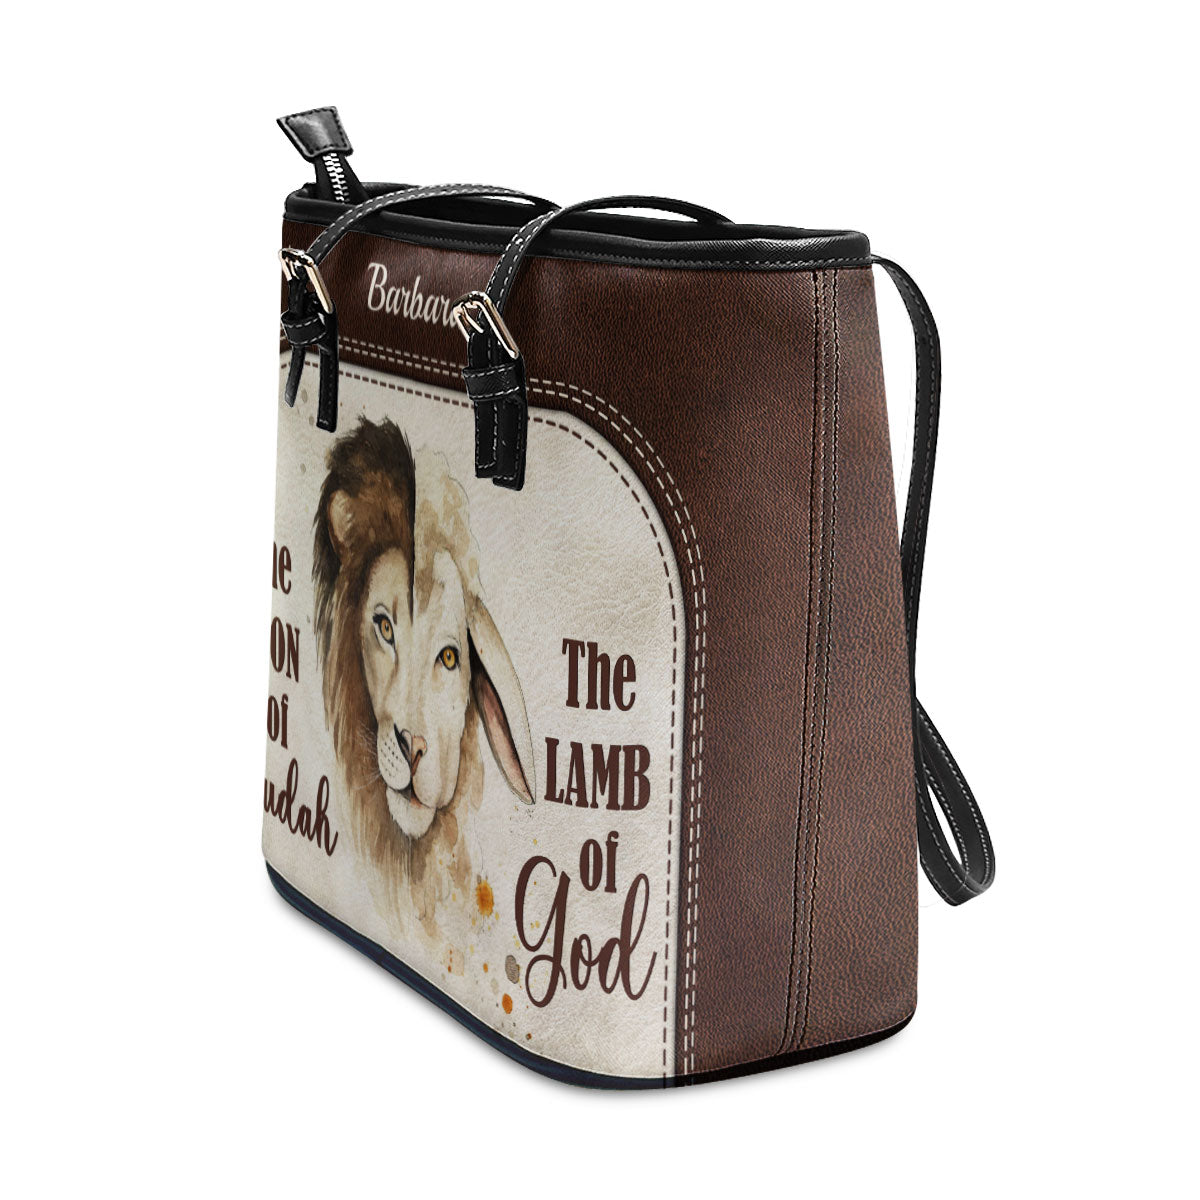 Jesuspirit Personalized Leather Bible Bag with Handle | Gifts for Christian Women | Lion & Lamb Custom Bible Carrying Purse with Handle| Christian